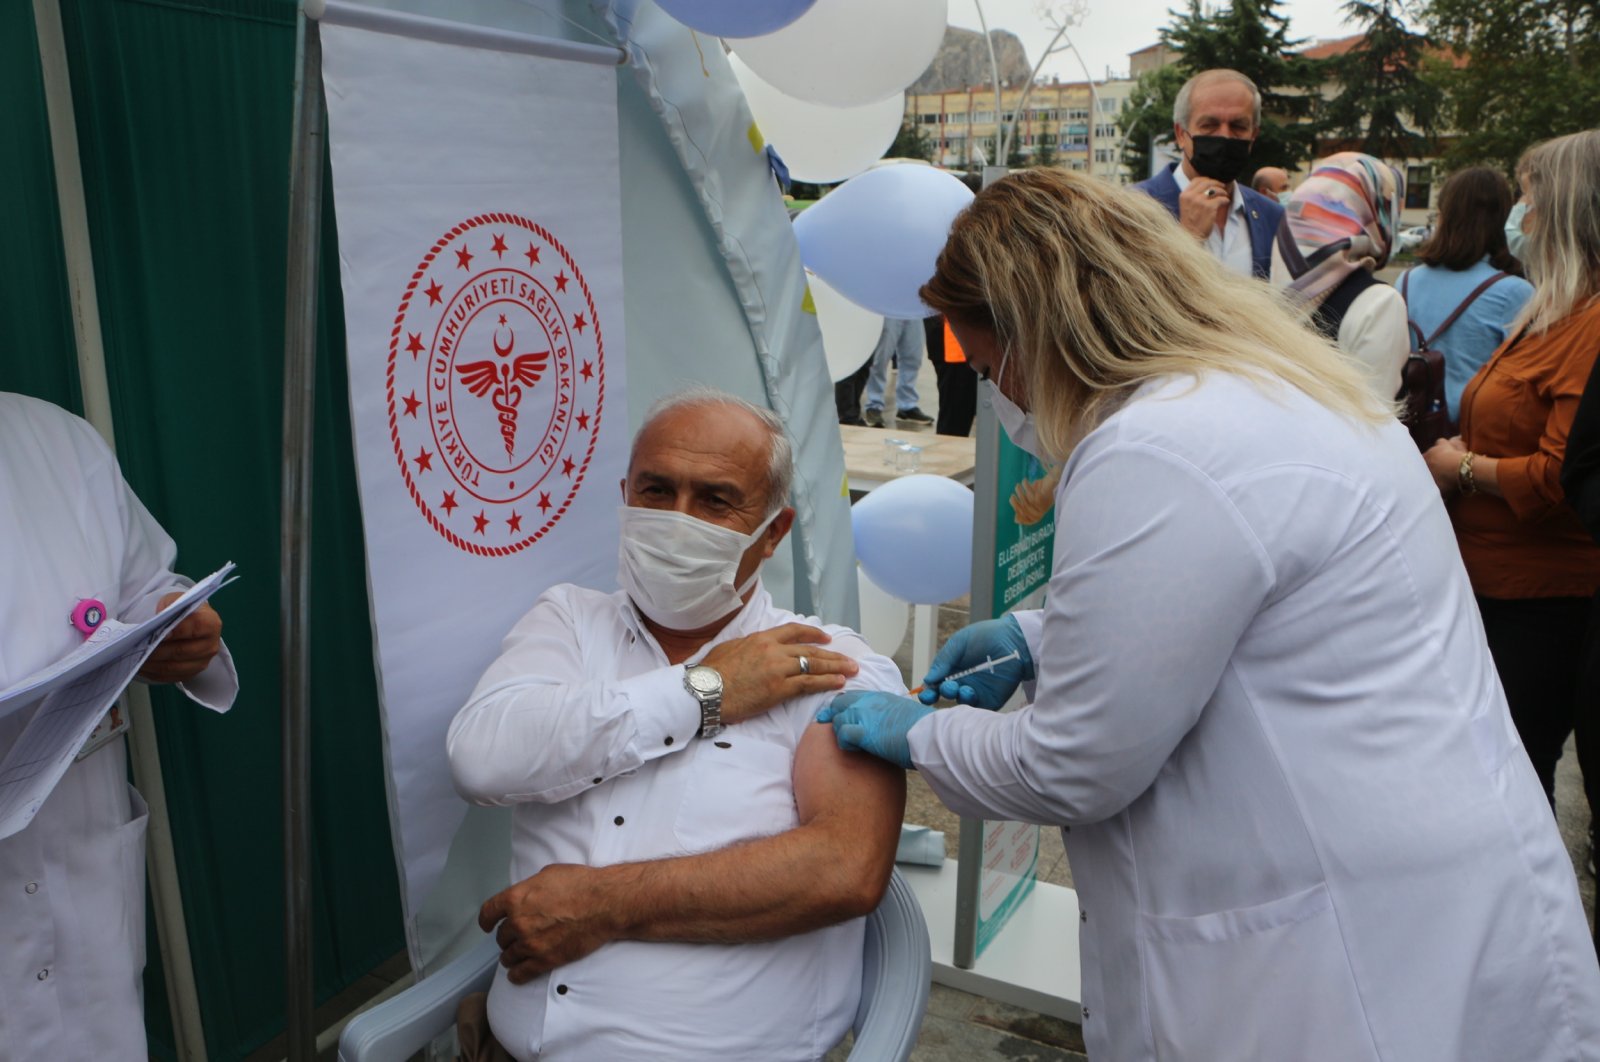 A man is vaccinated outside a vaccination tent, in Tokat, northern Turkey, Aug. 11, 2021. (DHA Photo)